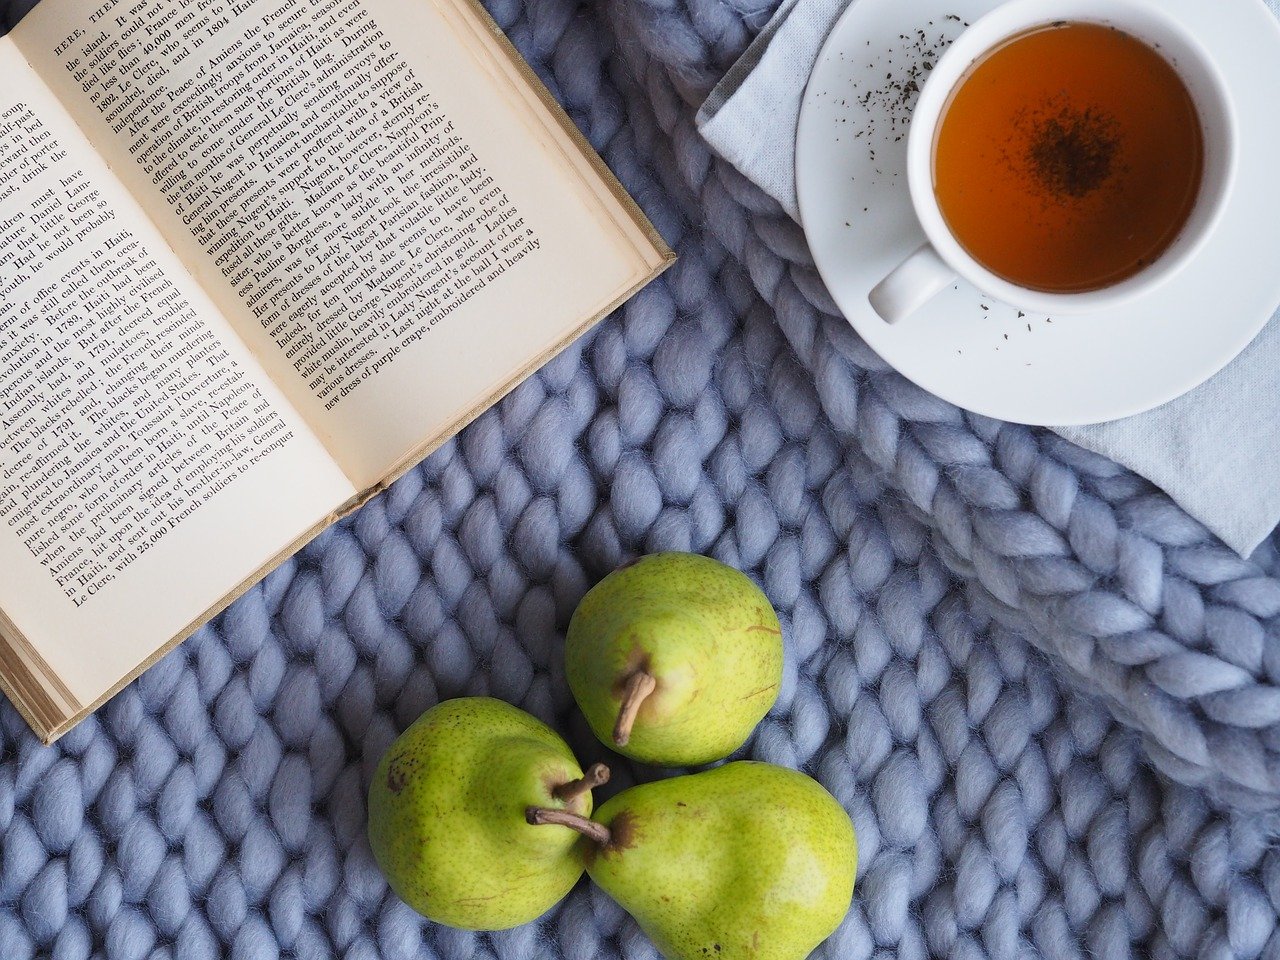 Table top view of an open book, a cup of tea and 3 pears, resting on a knitted blue blanket.